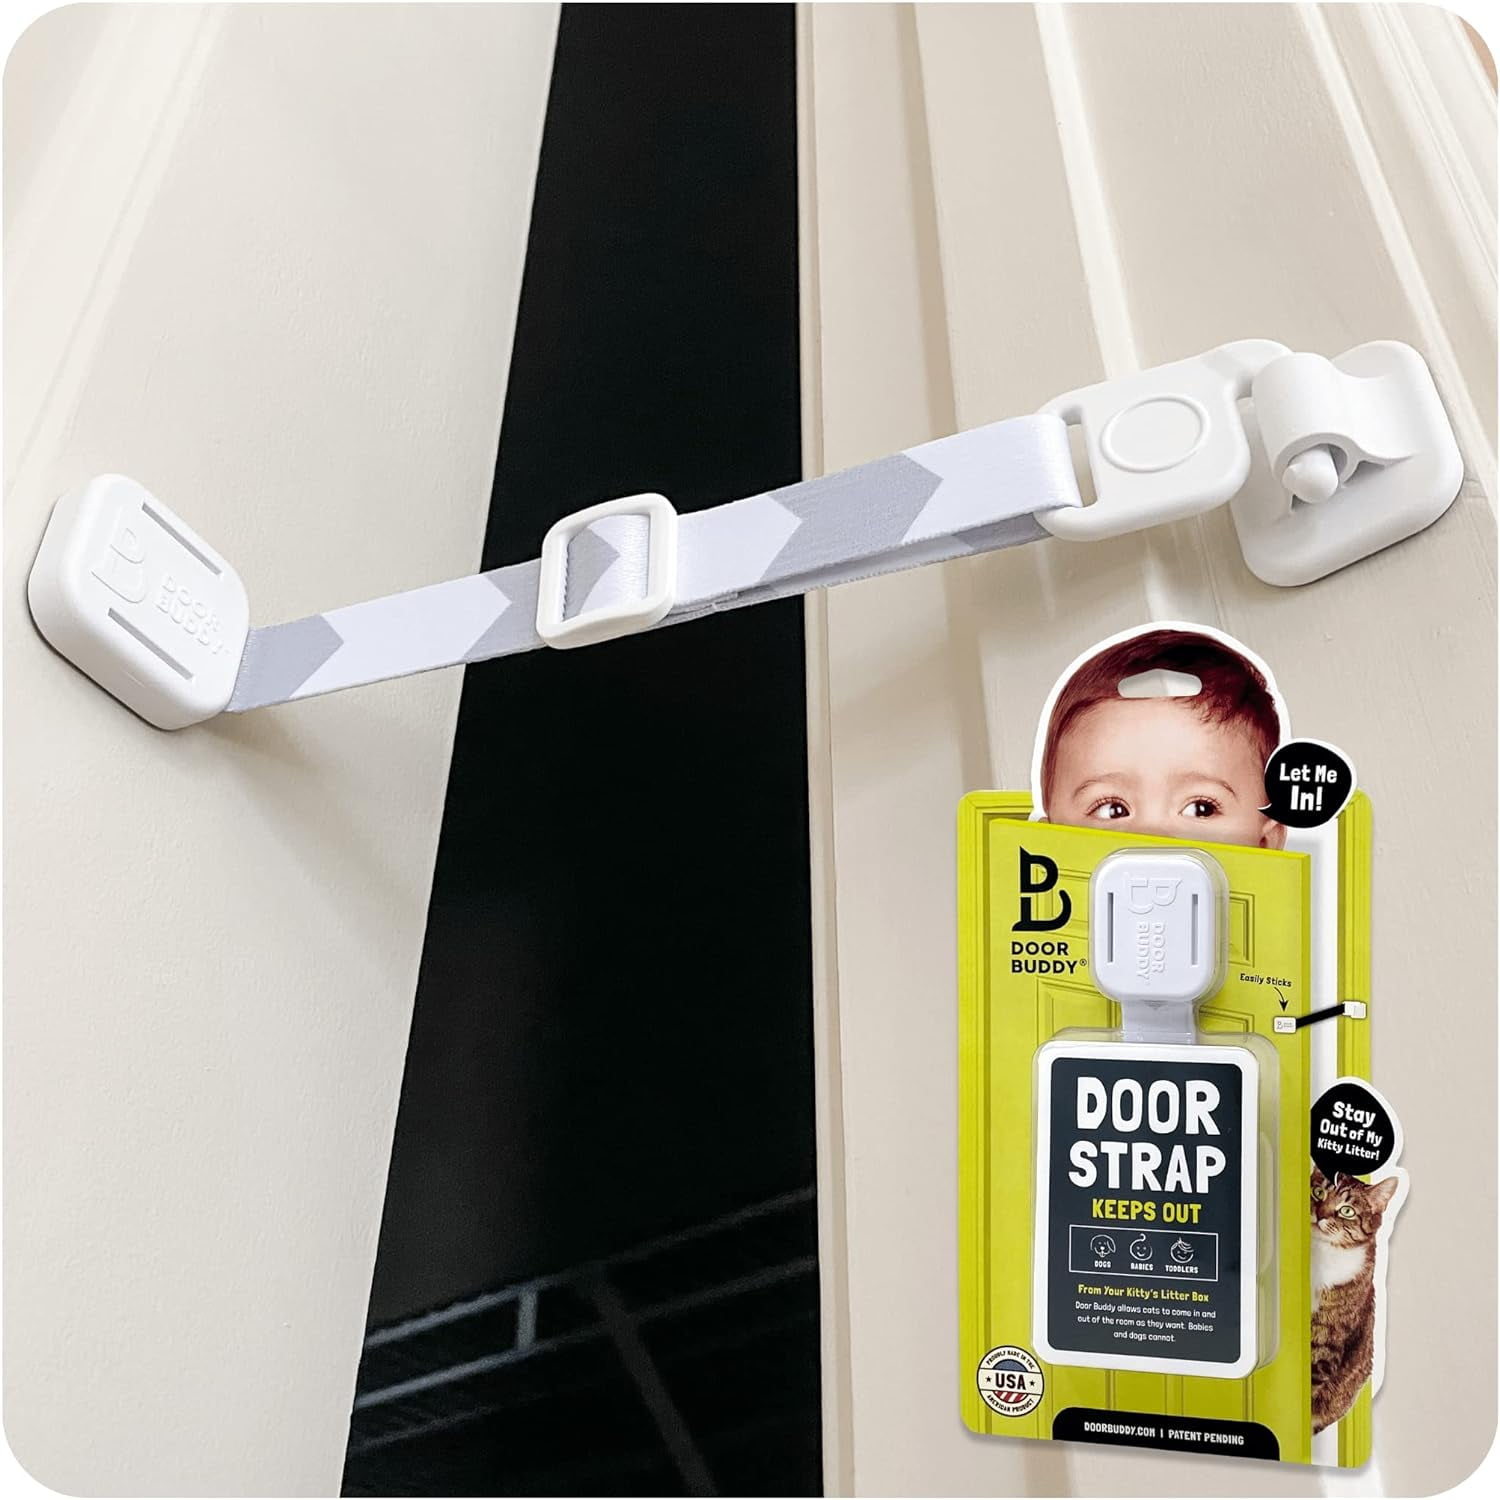 Neobay Child Proof Door Lock with Adjustable Door Strap and Latch. No Need  for Interior Cat Door. Keep Toddler Out of Room with Litter Box While Let